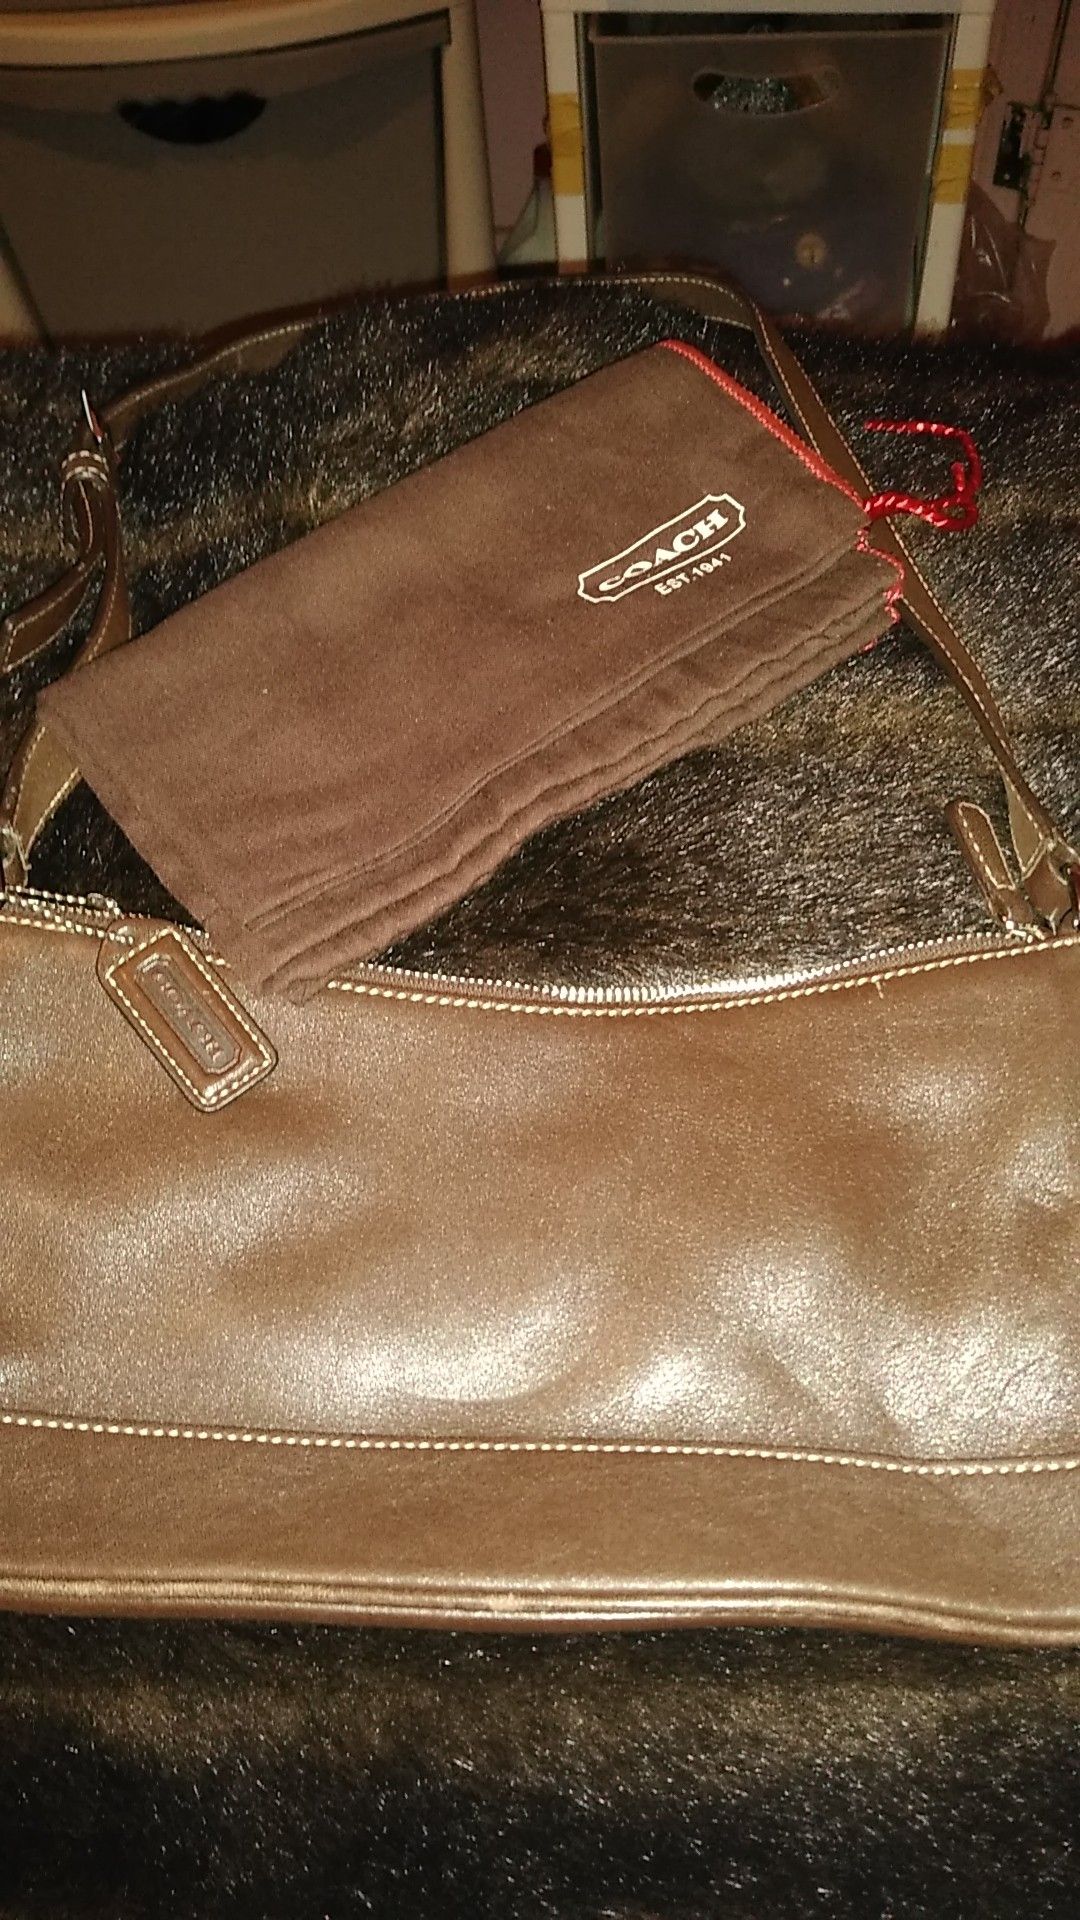 COACH LEATHER HANDBAG SMALL SIZE WITH DUST BAG